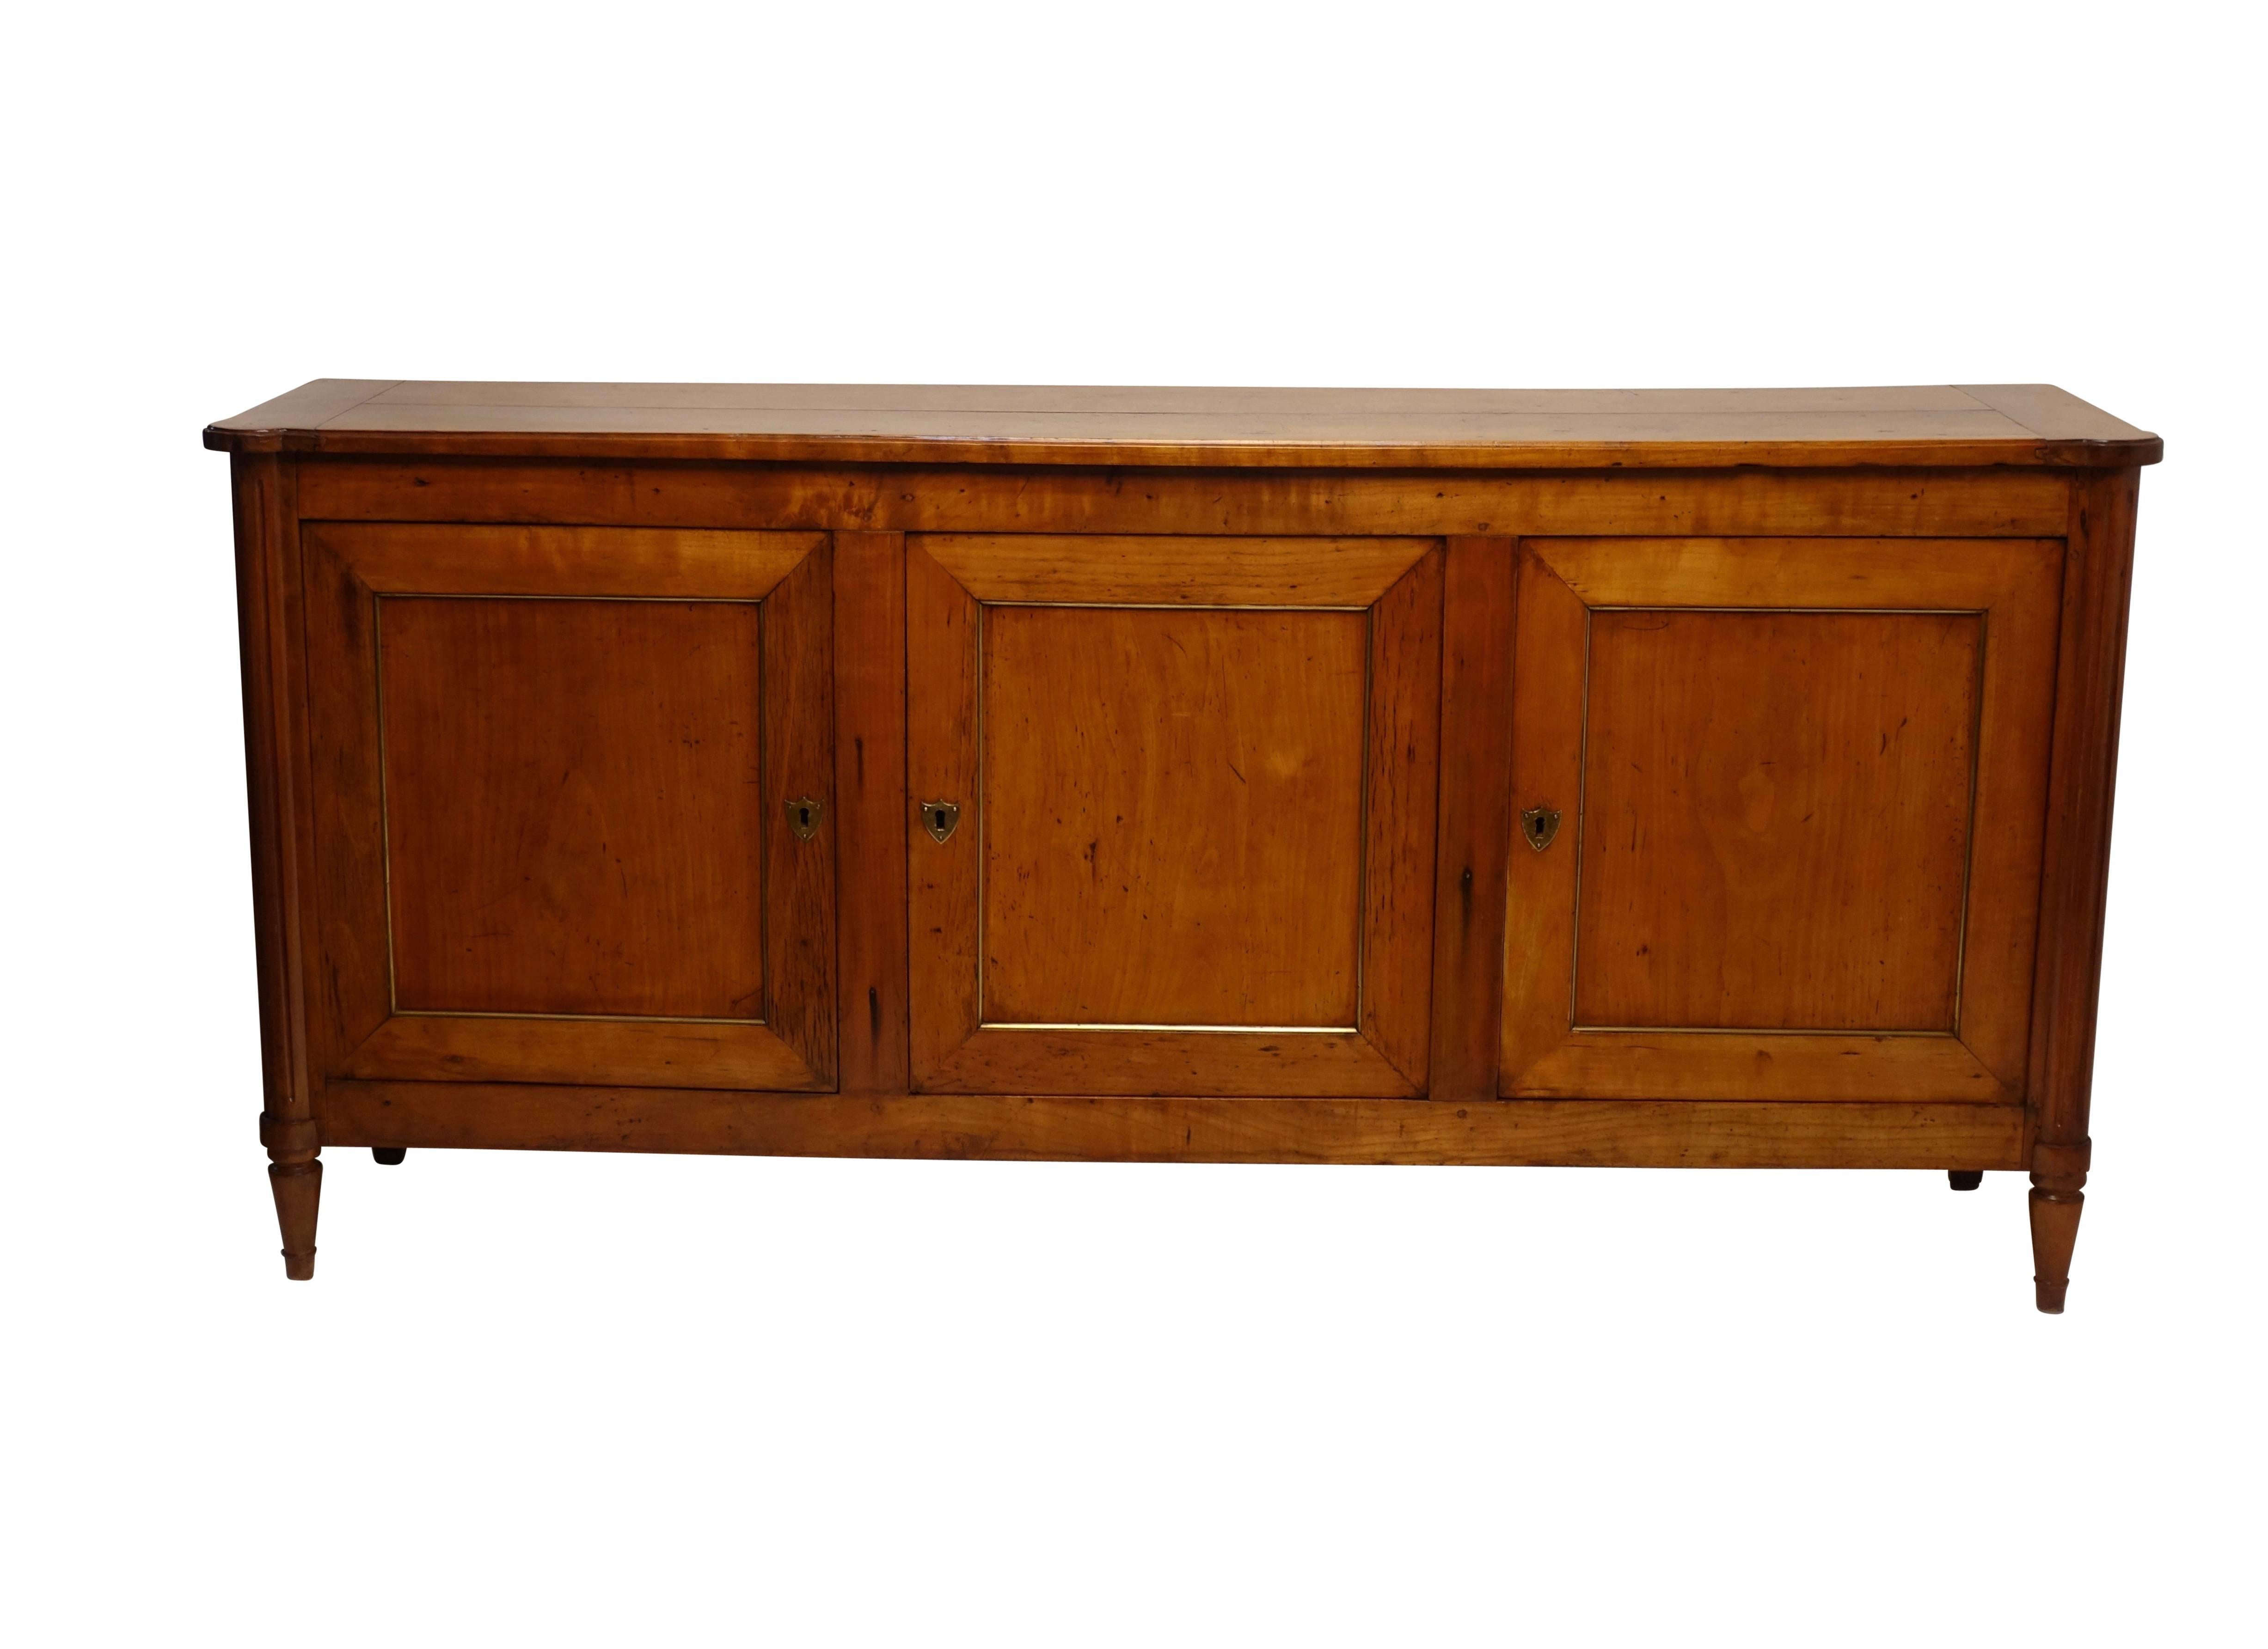 Unique size Directoire period buffet enfilade. Having a shaped top above three brass trimmed recessed paneled doors flanked by fluted column supports, standing on turned tapering legs. Exceptional rich cherrywood color throughout and interior fitted